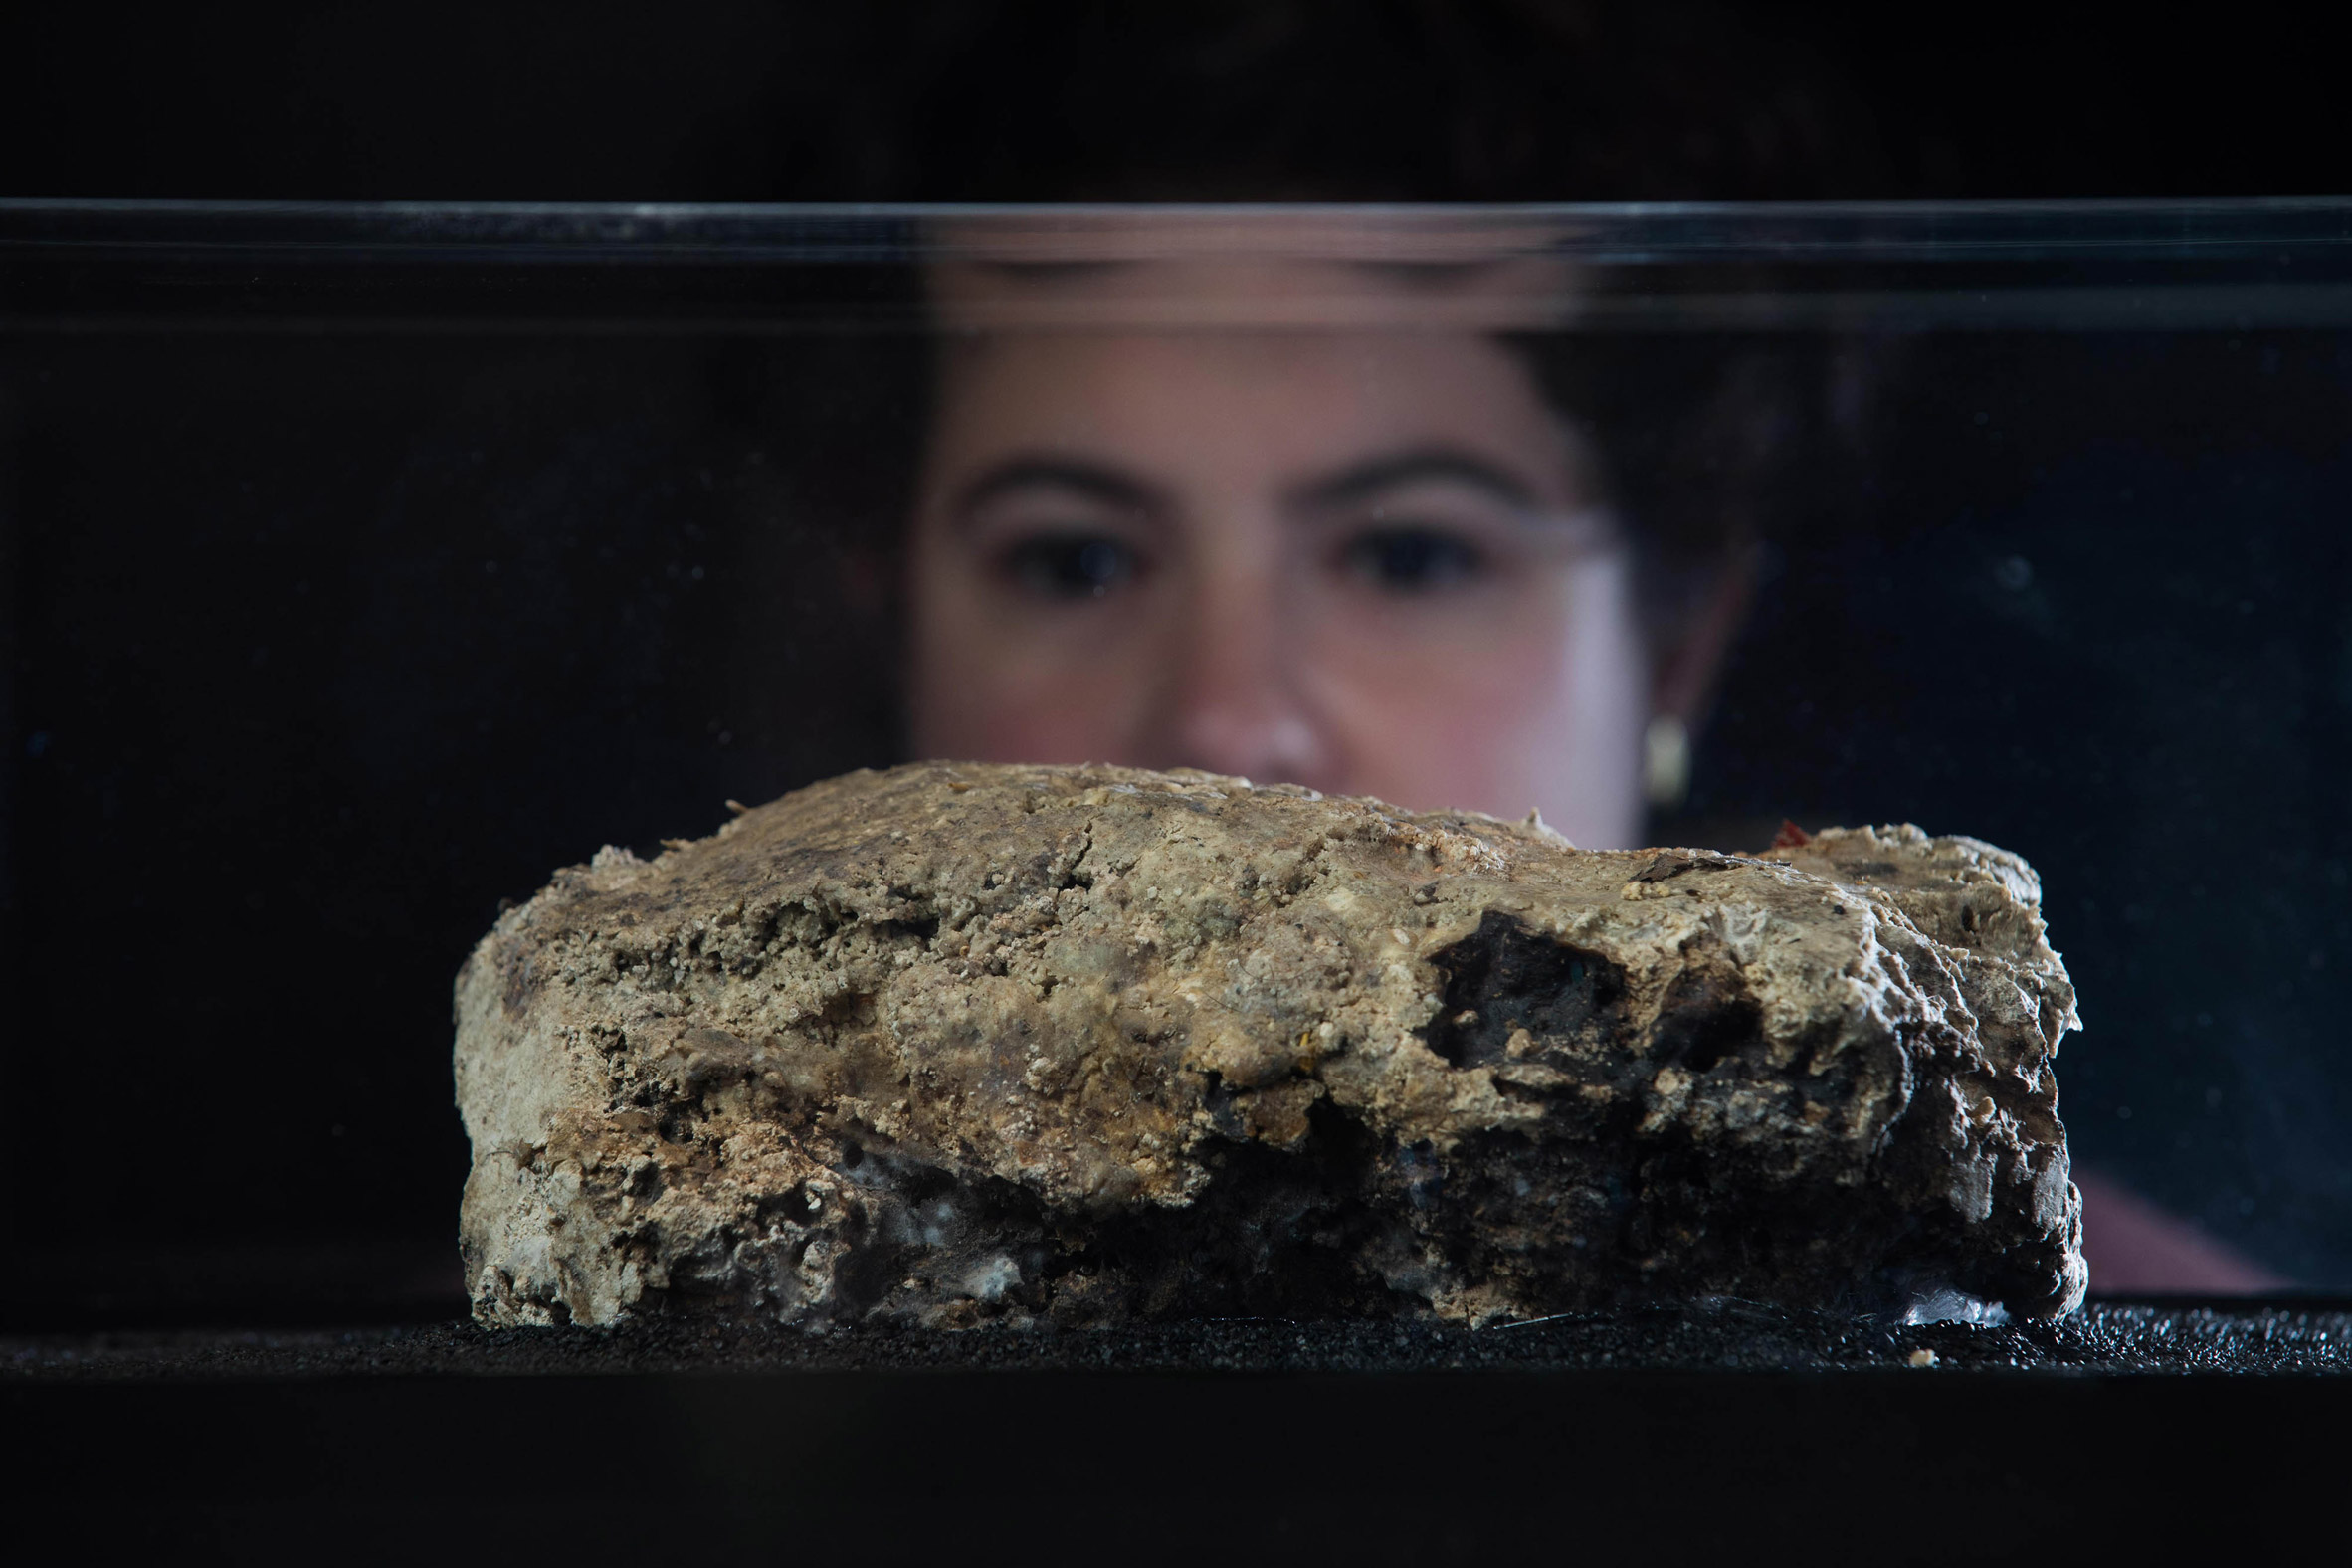 Fatberg exhibited at the Museum of London